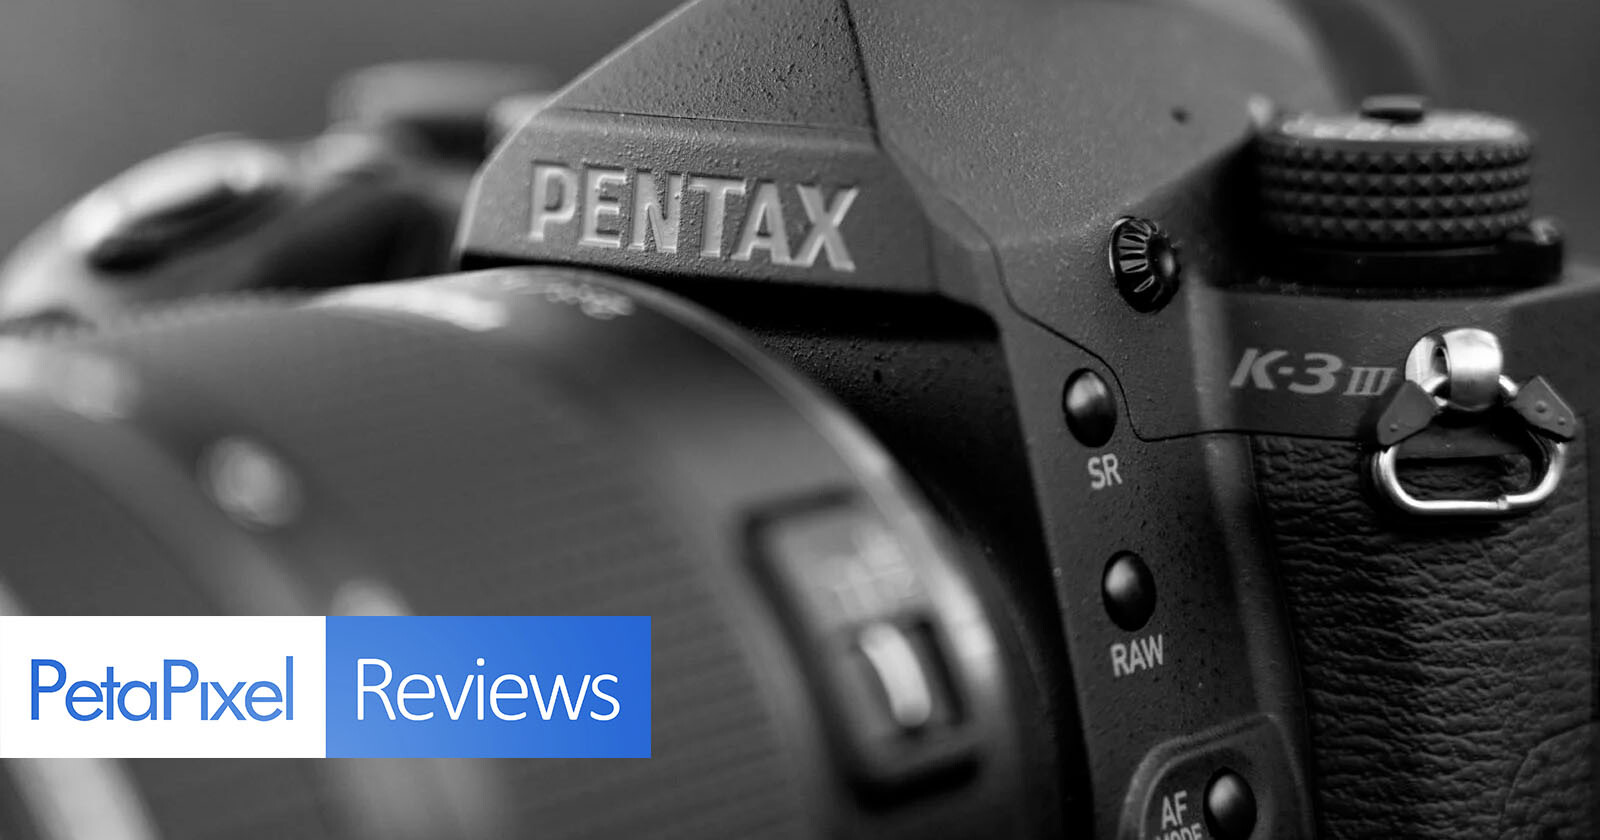 Pentax K-3 III Monochrome Review: A DSLR Just for B&W Photo Lovers